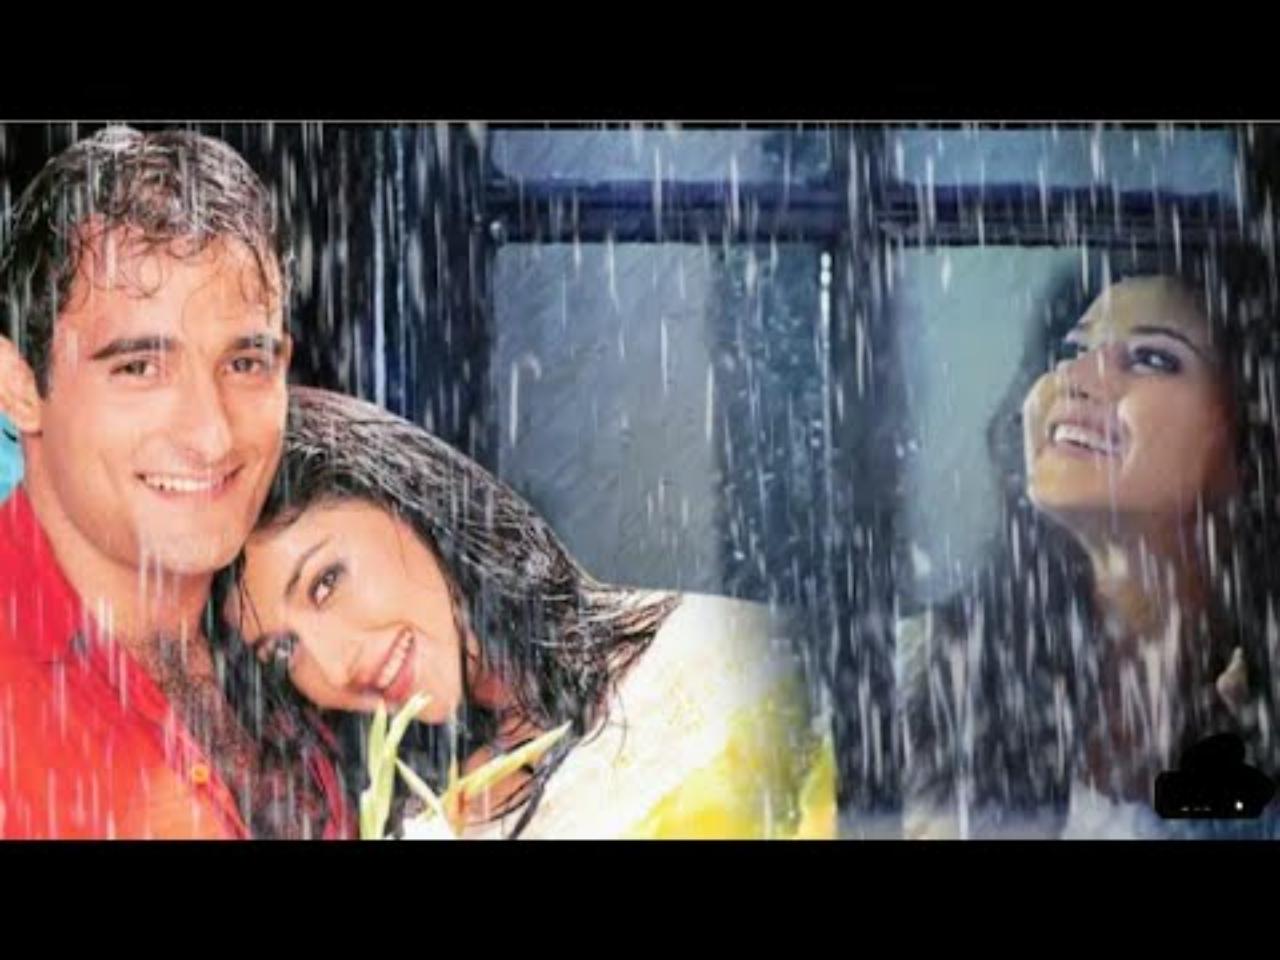 10. Dahek
The song 'Saawan Barse Tarse Dil' from the film Dahek (1999), directed by Lateef Binny, sets the gold standard in Hindi cinema for portraying the experience of navigating through a heavy downpour to reach a destination. This song sweetens the arduous journey by hinting that love awaits at the end, despite the challenges of navigating a heavy Indian monsoon